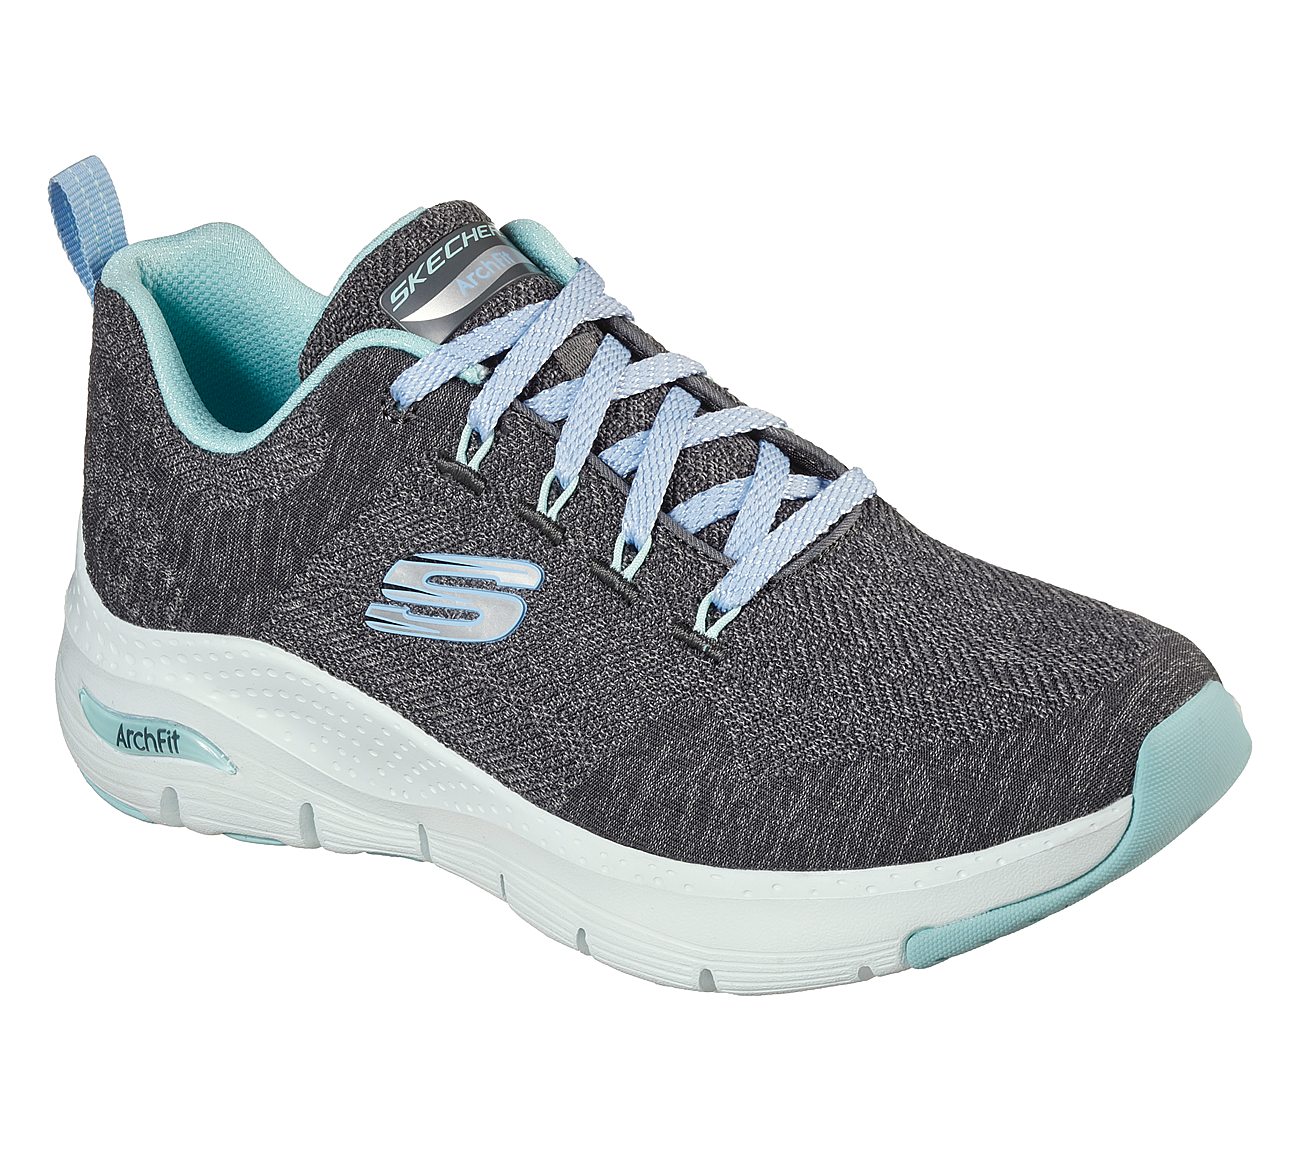 ARCH FIT-COMFY WAVE, CHARCOAL/TURQUOISE Footwear Lateral View